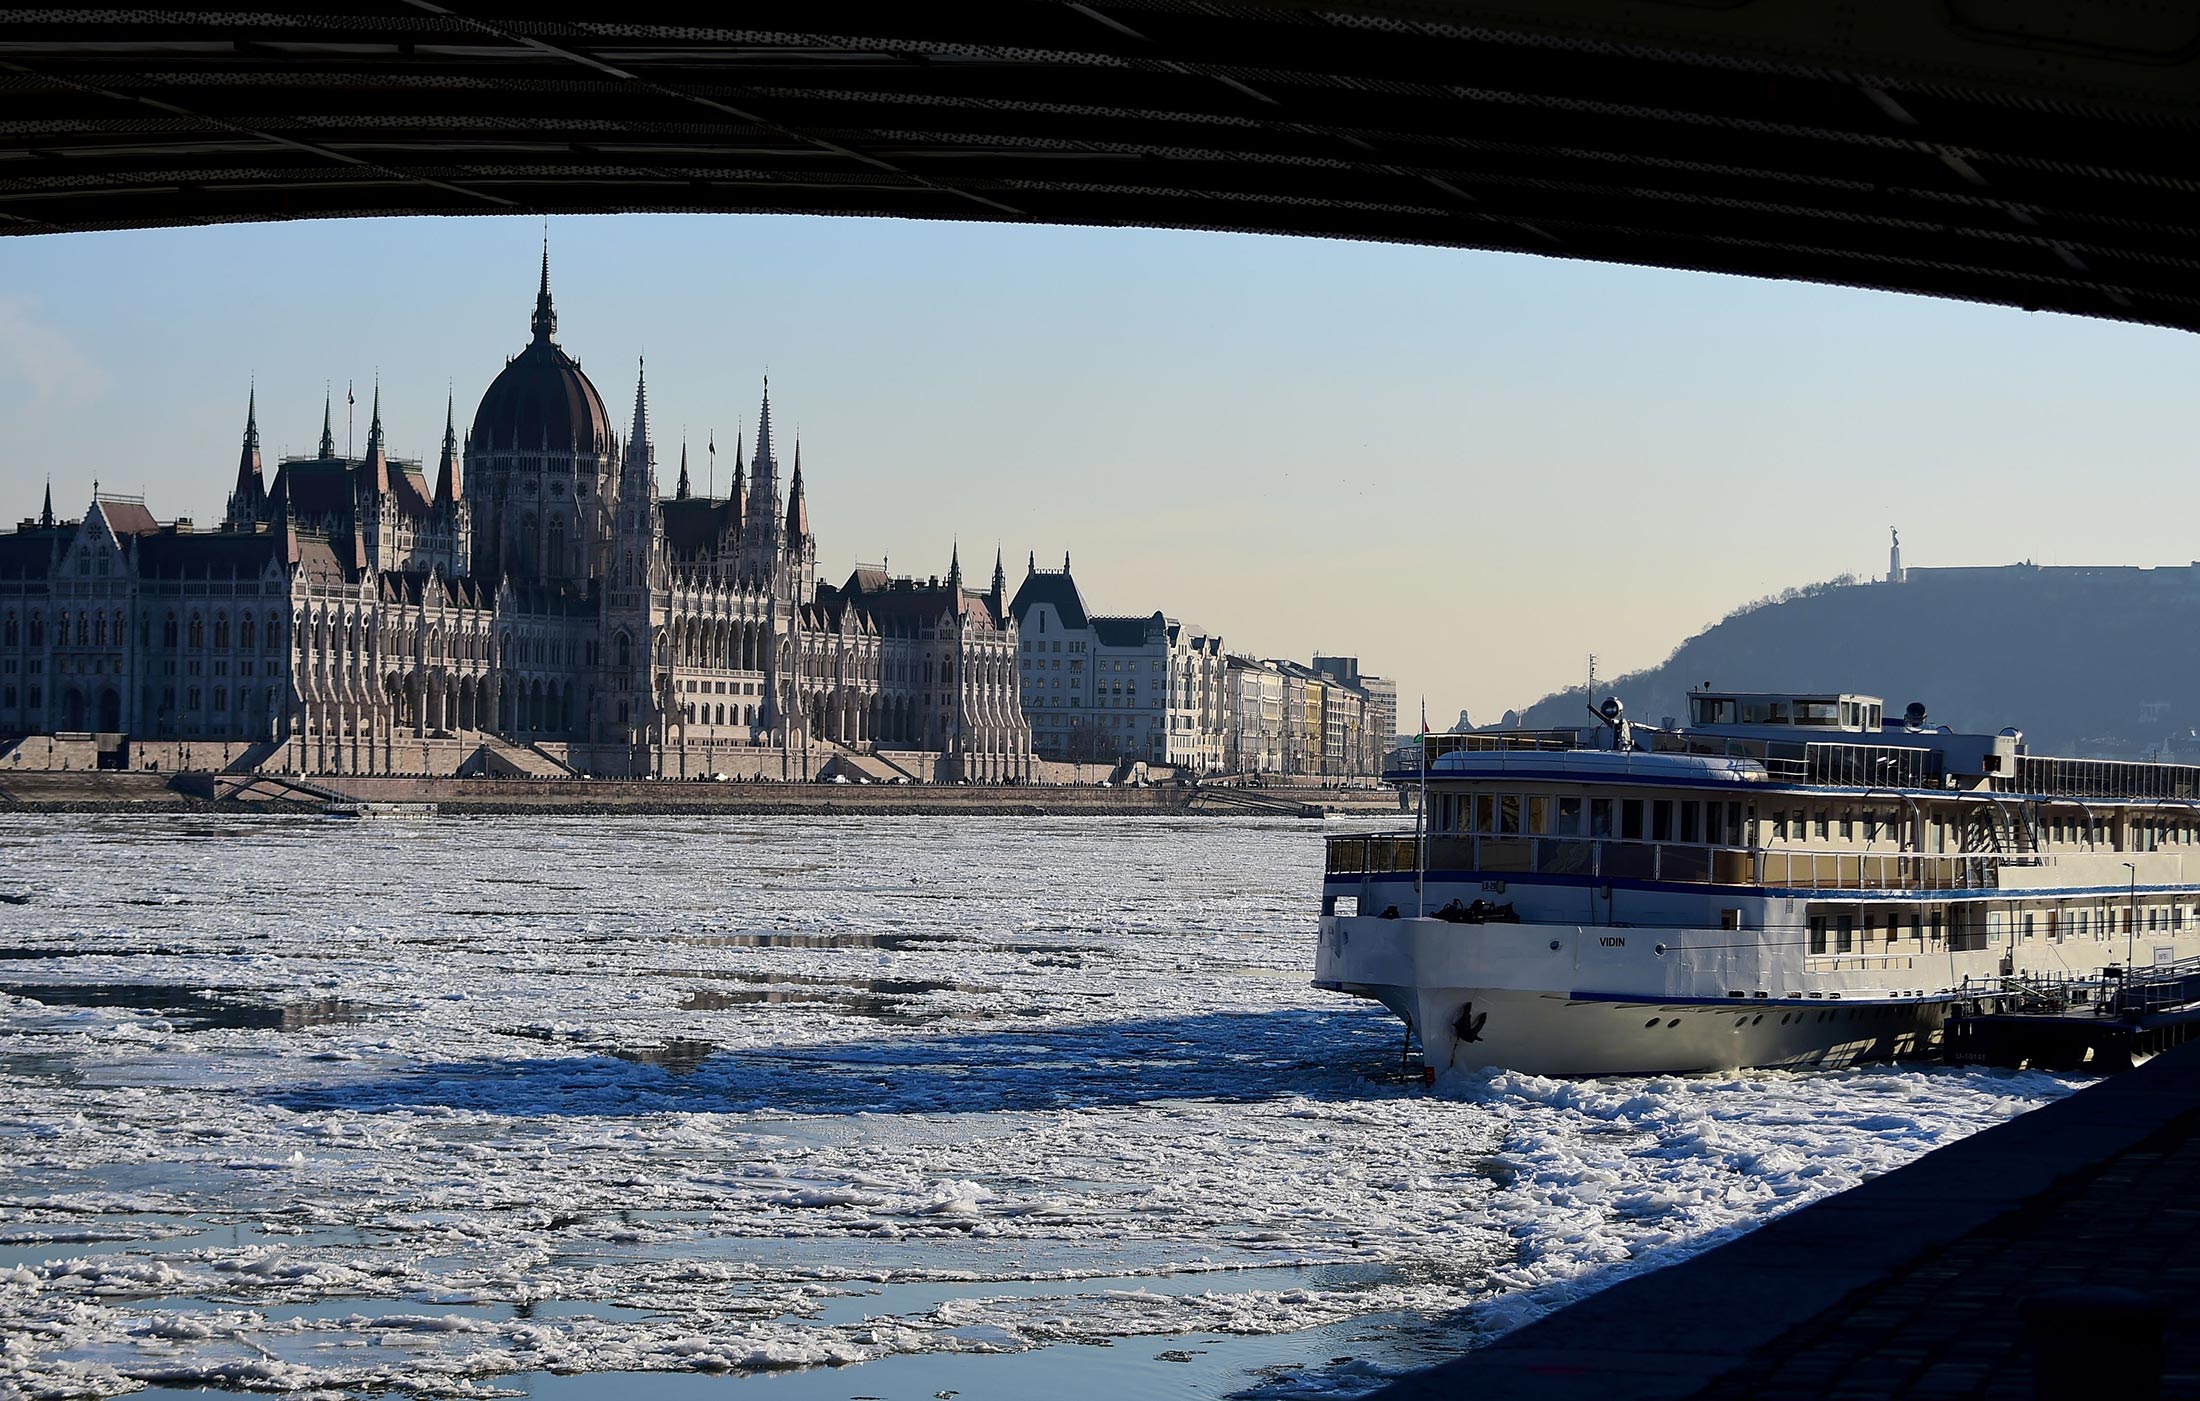 Ice floats in the water of the River Danube in front of the parliament building of Budapest downtown on January 8, 2017.
